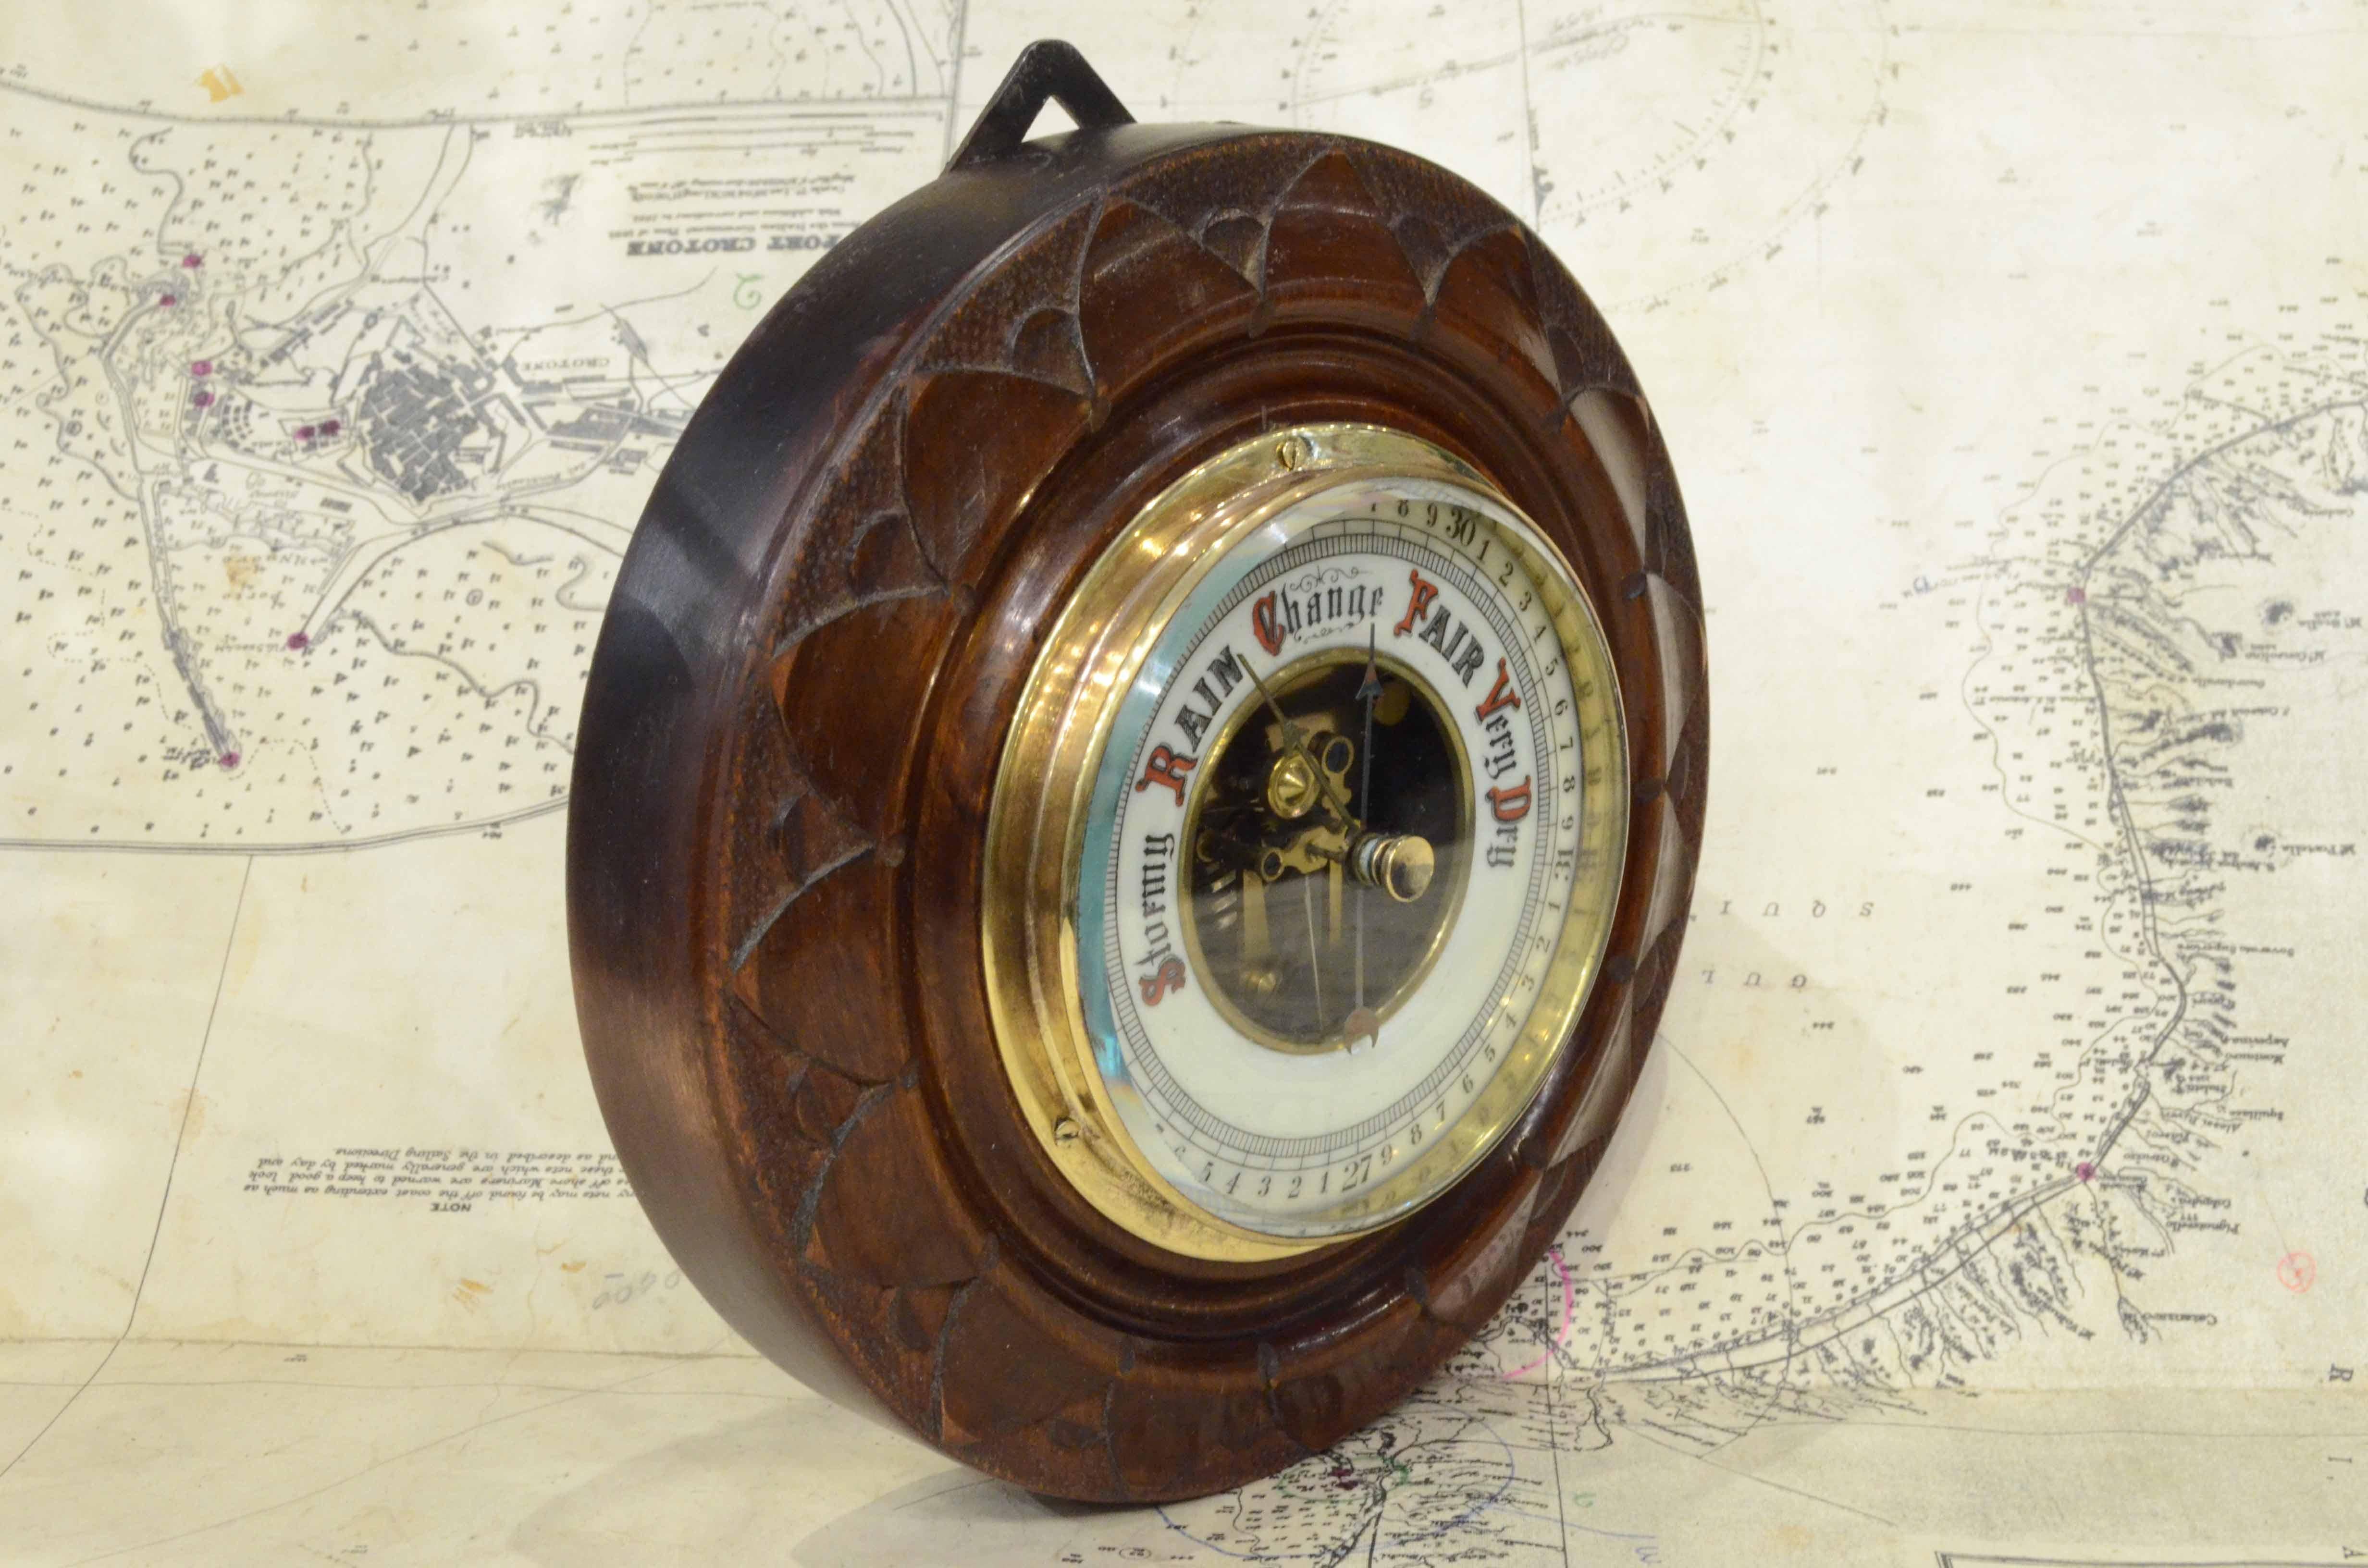 Eaerly 1900s English Carved Woodd Aneroid Barometer Antique Forecast Instrument 3